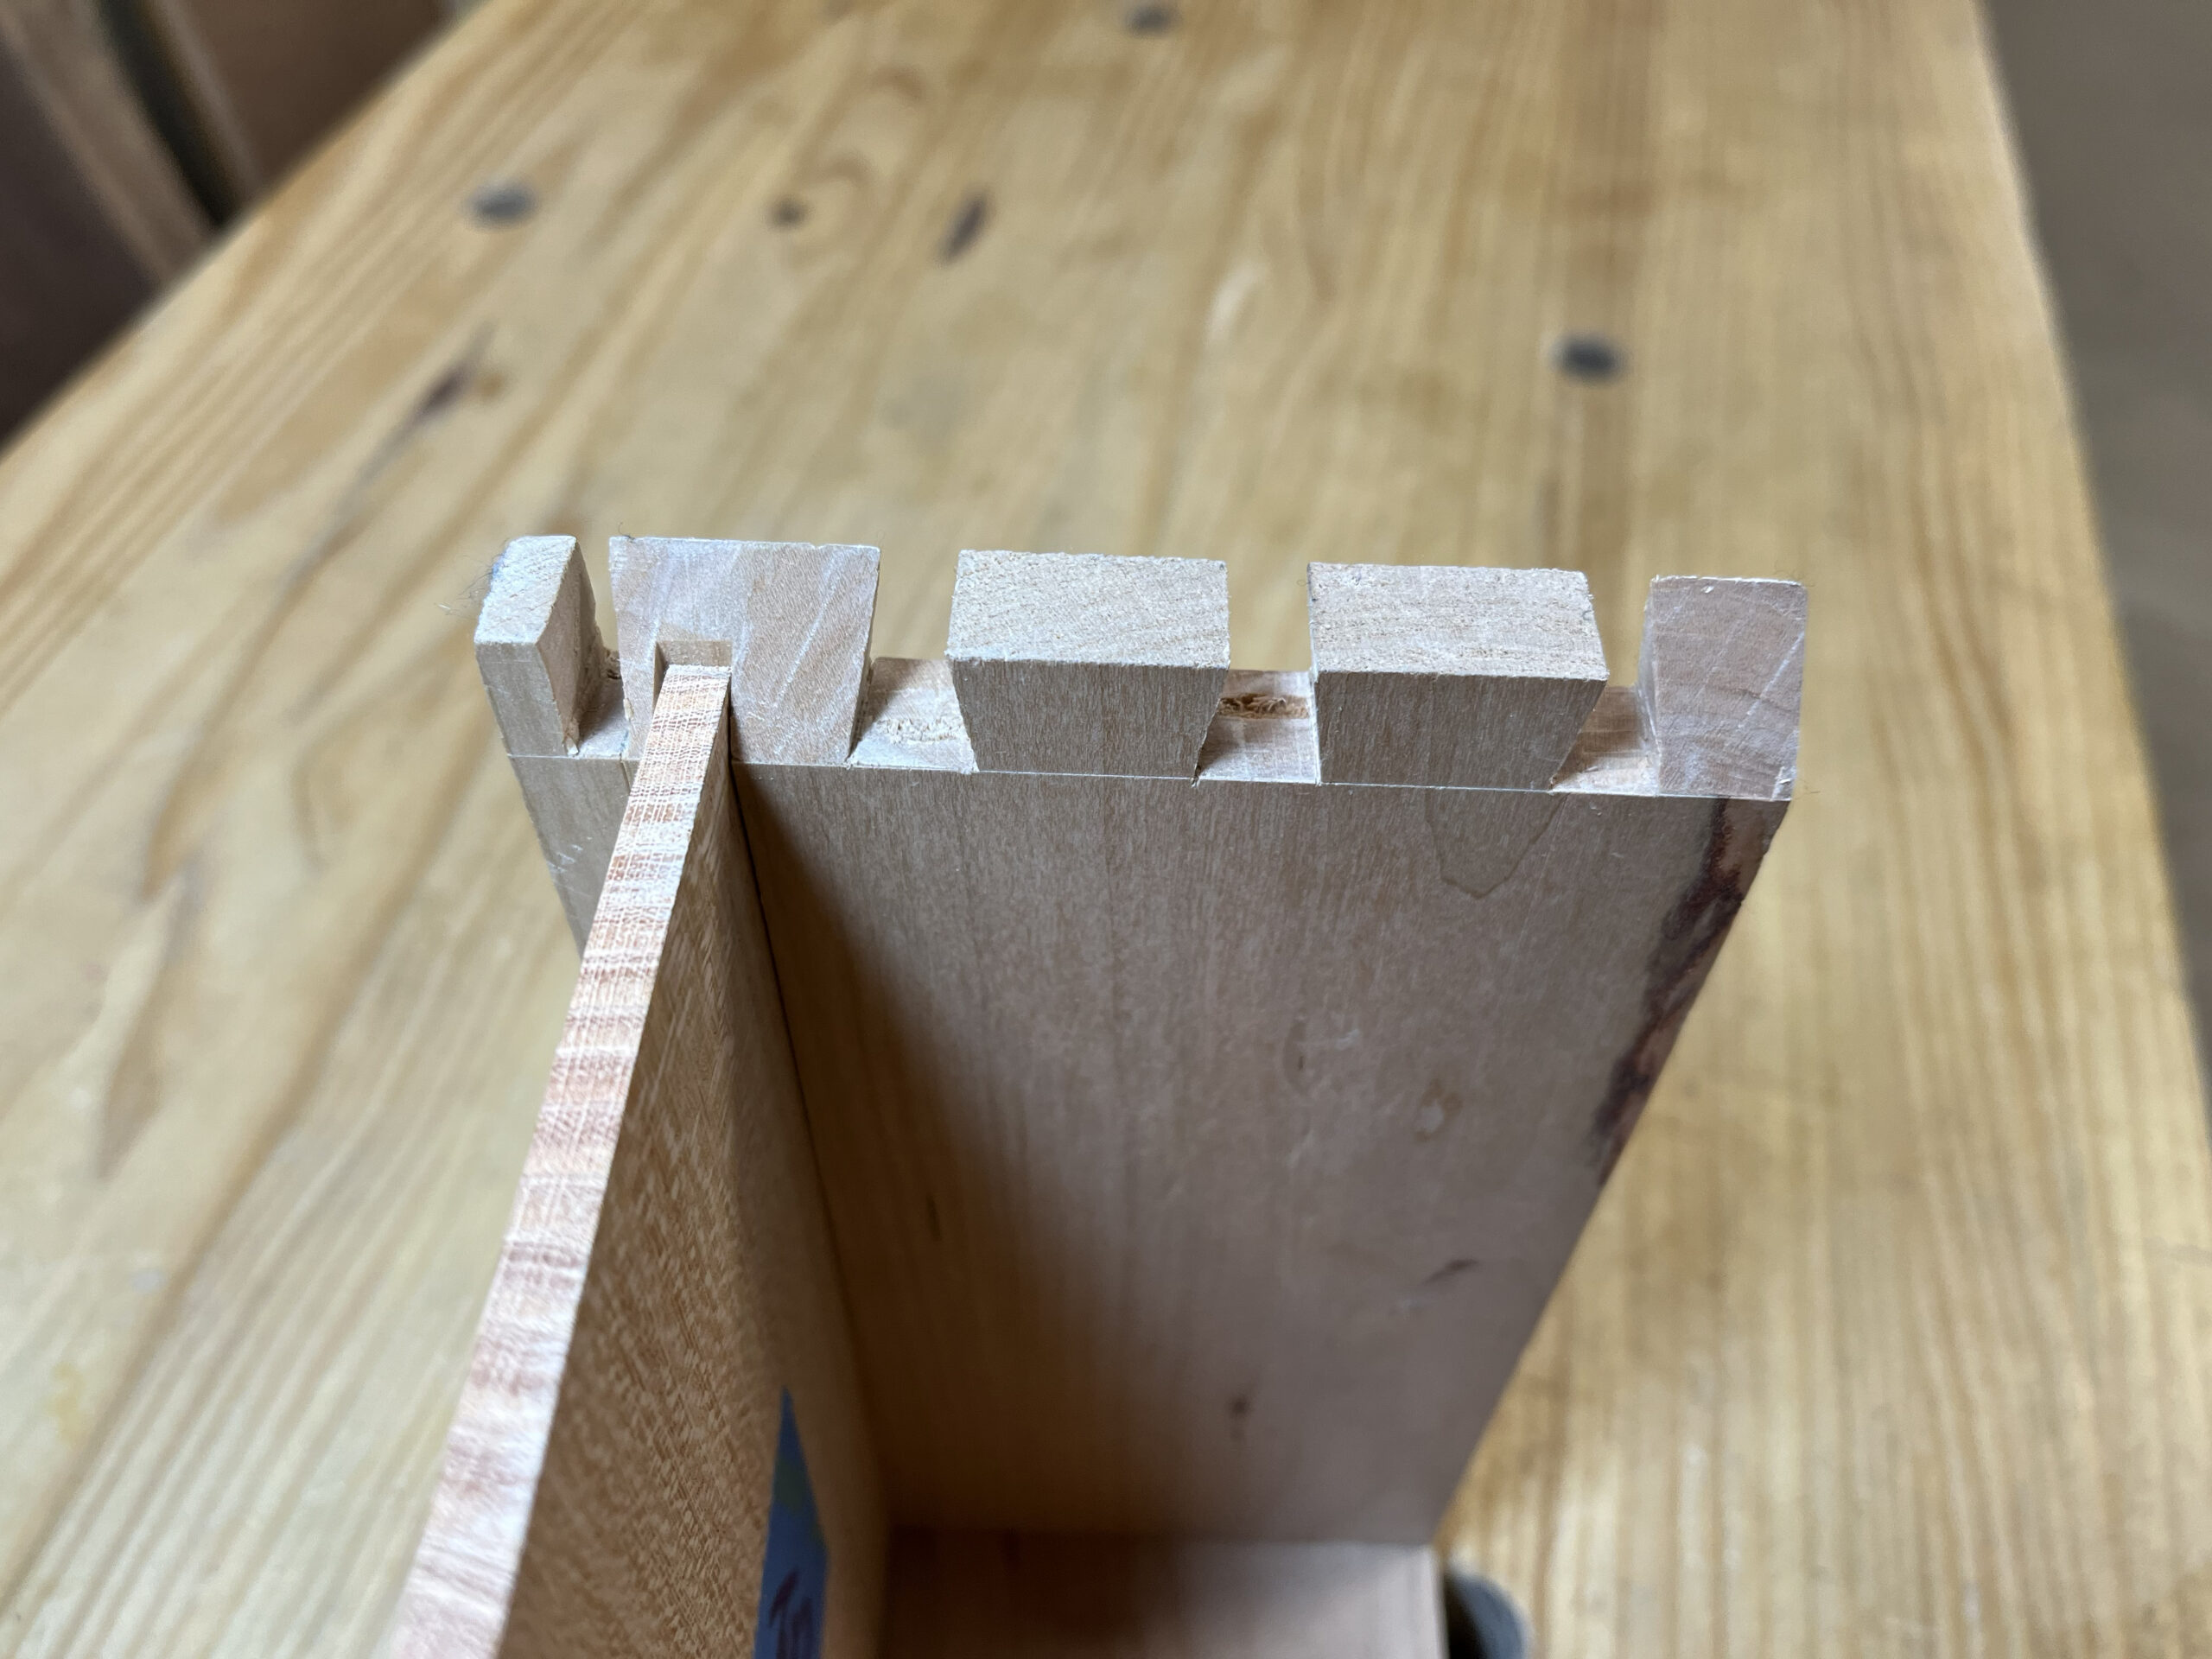 Exploring mitered dovetails with hidden inside groove